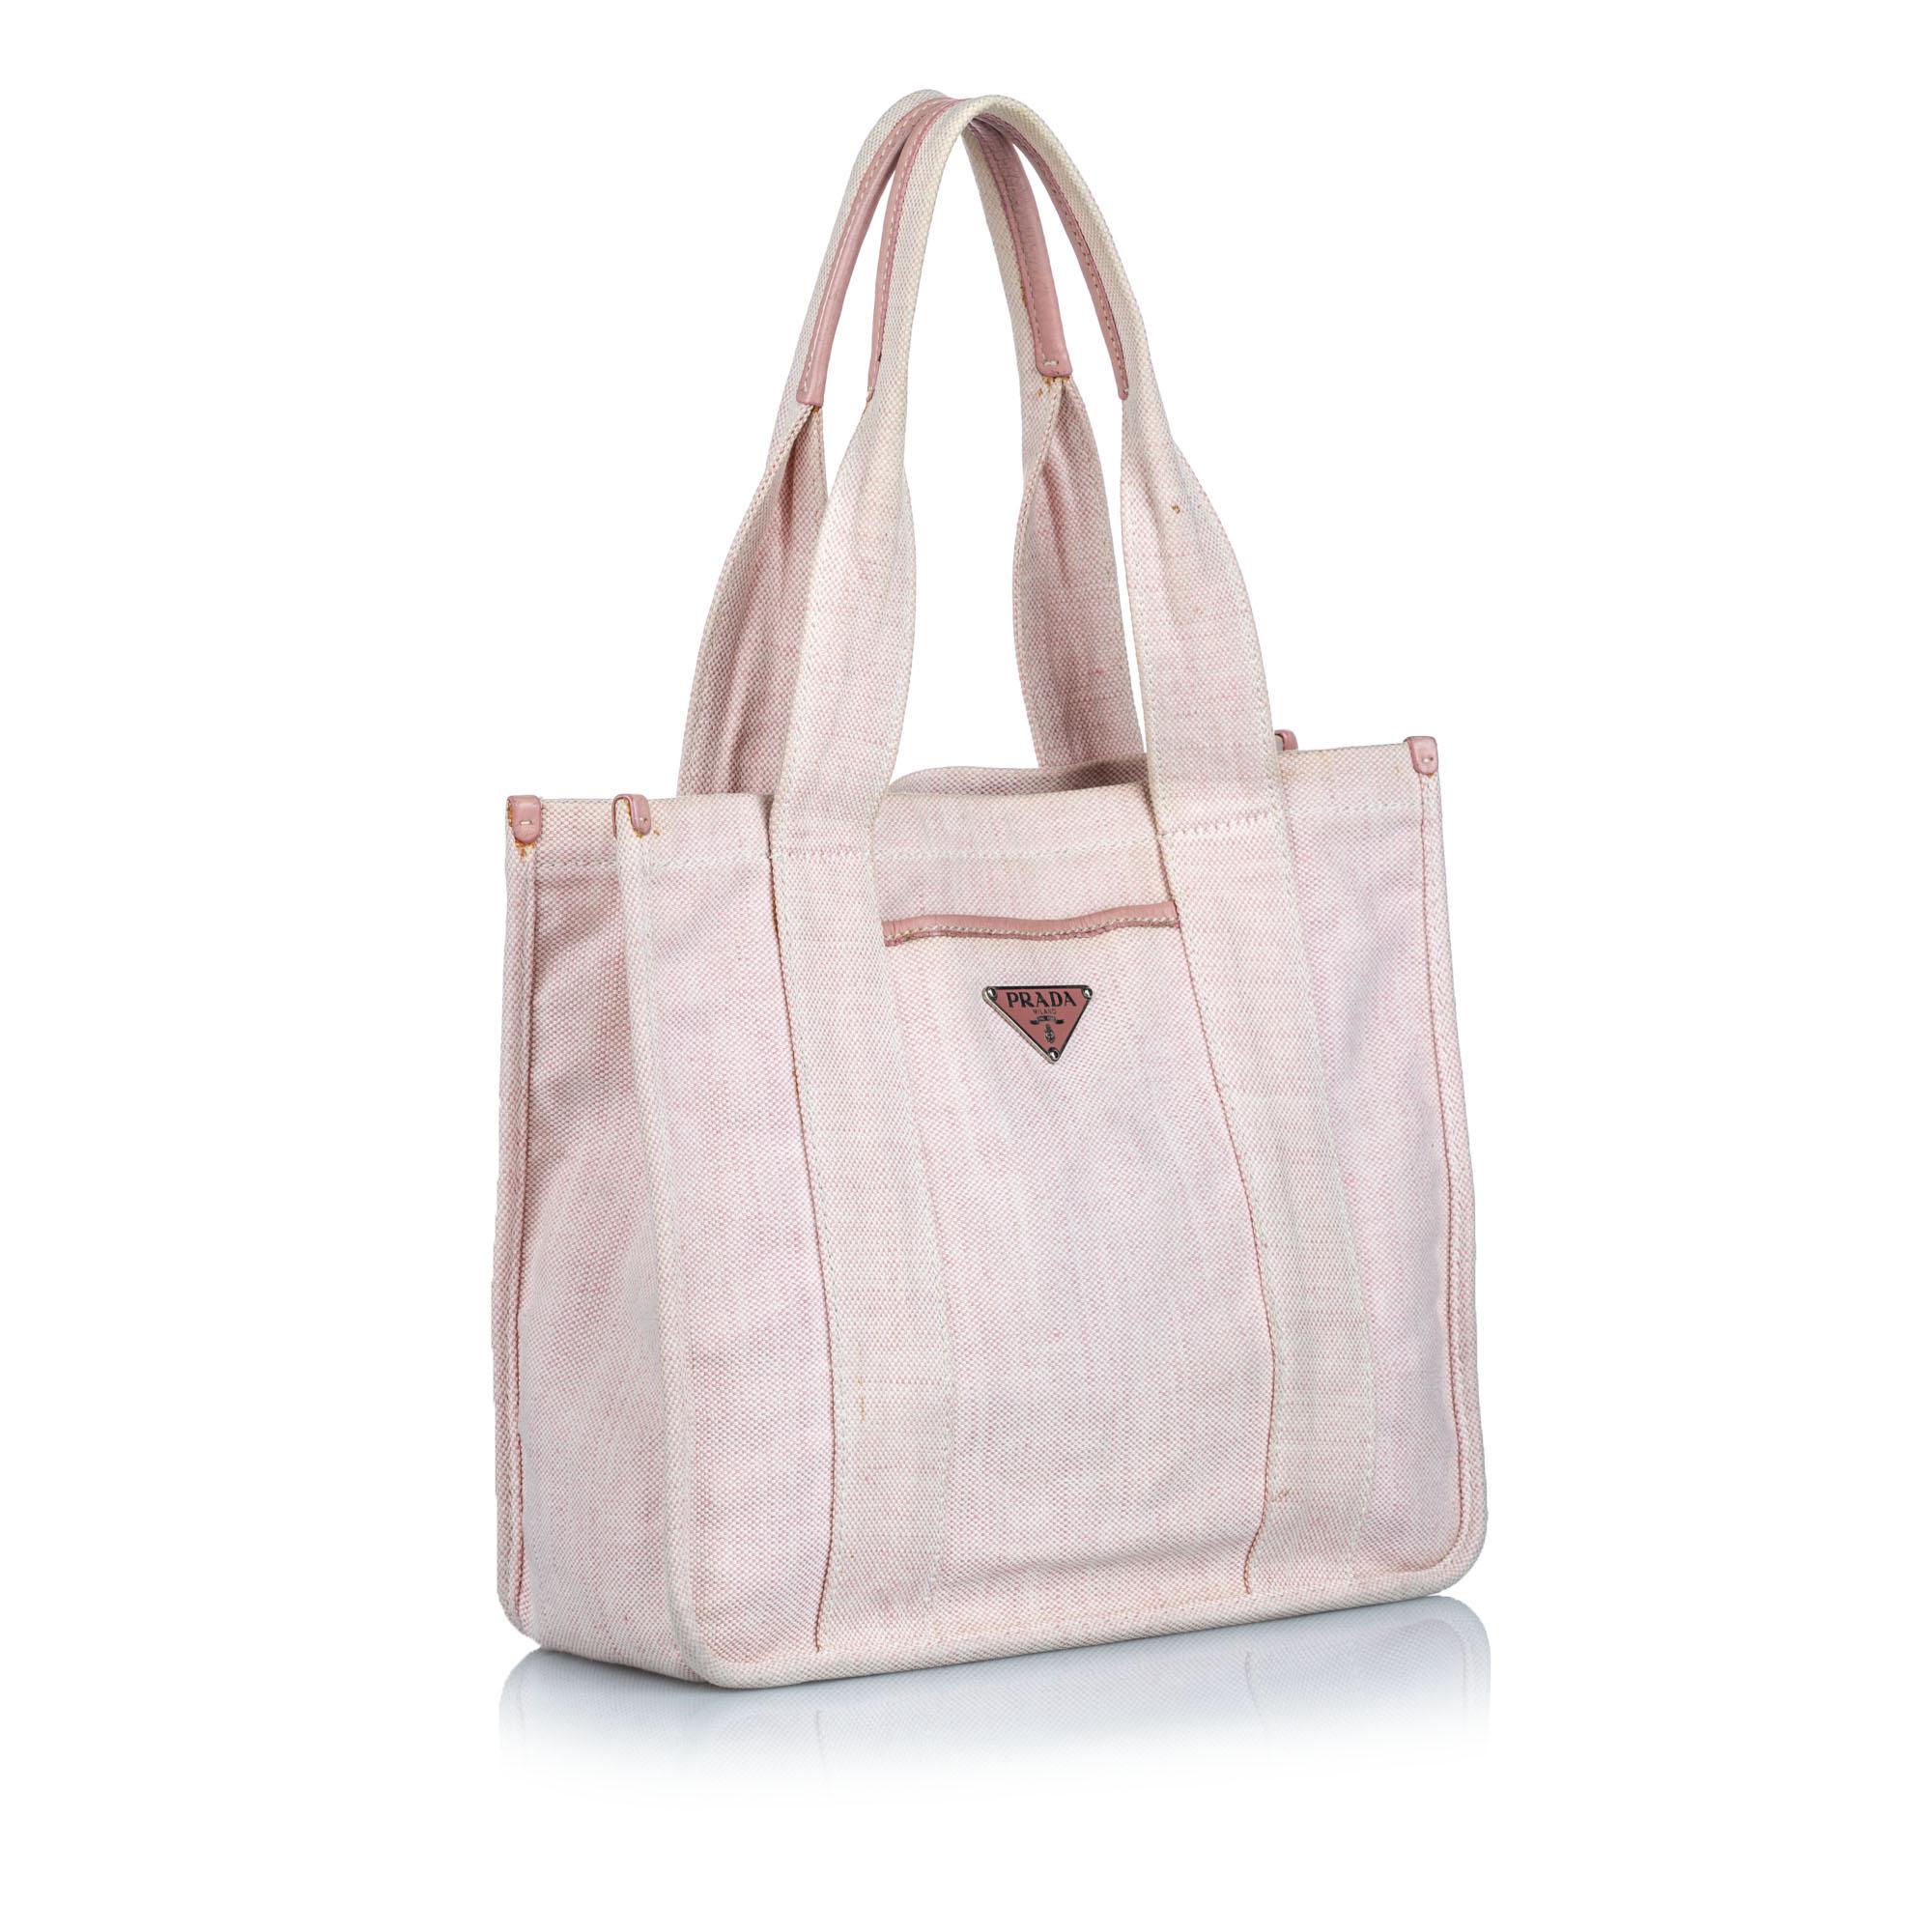 This tote bag features a canvas body with leather trim, a front exterior slip pocket, flat handles, an open top, and an interior zip pocket. It carries as B+ condition rating.

Inclusions: 
This item does not come with